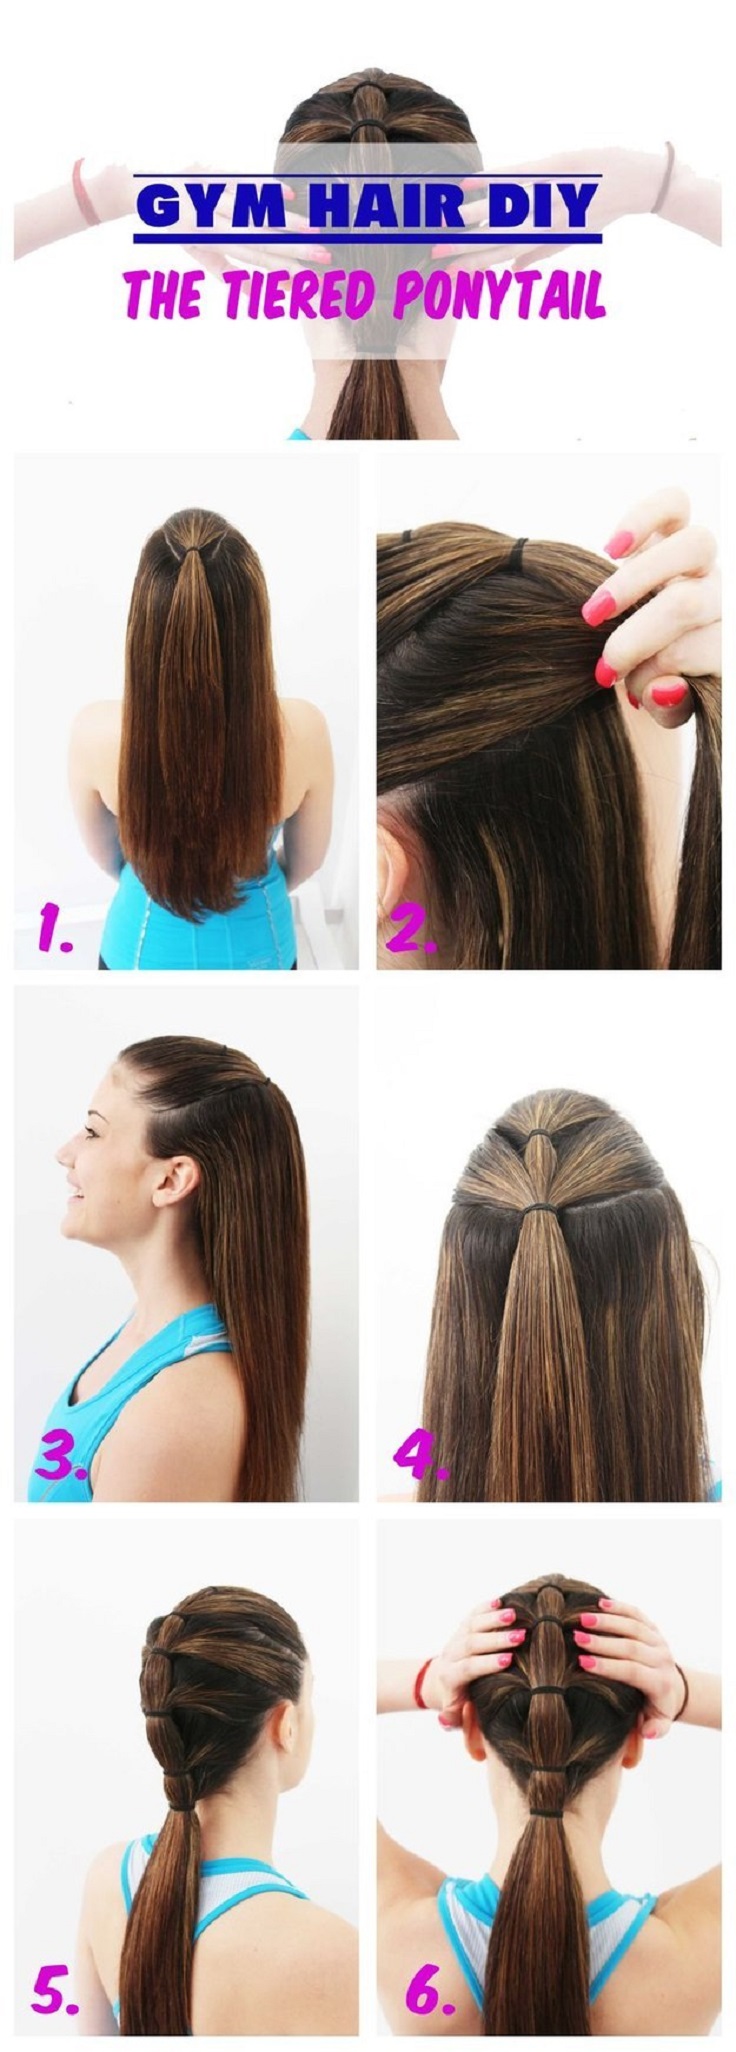 Top 10 Fast and Simple Workout Hairstyle Ideas - Top Inspired